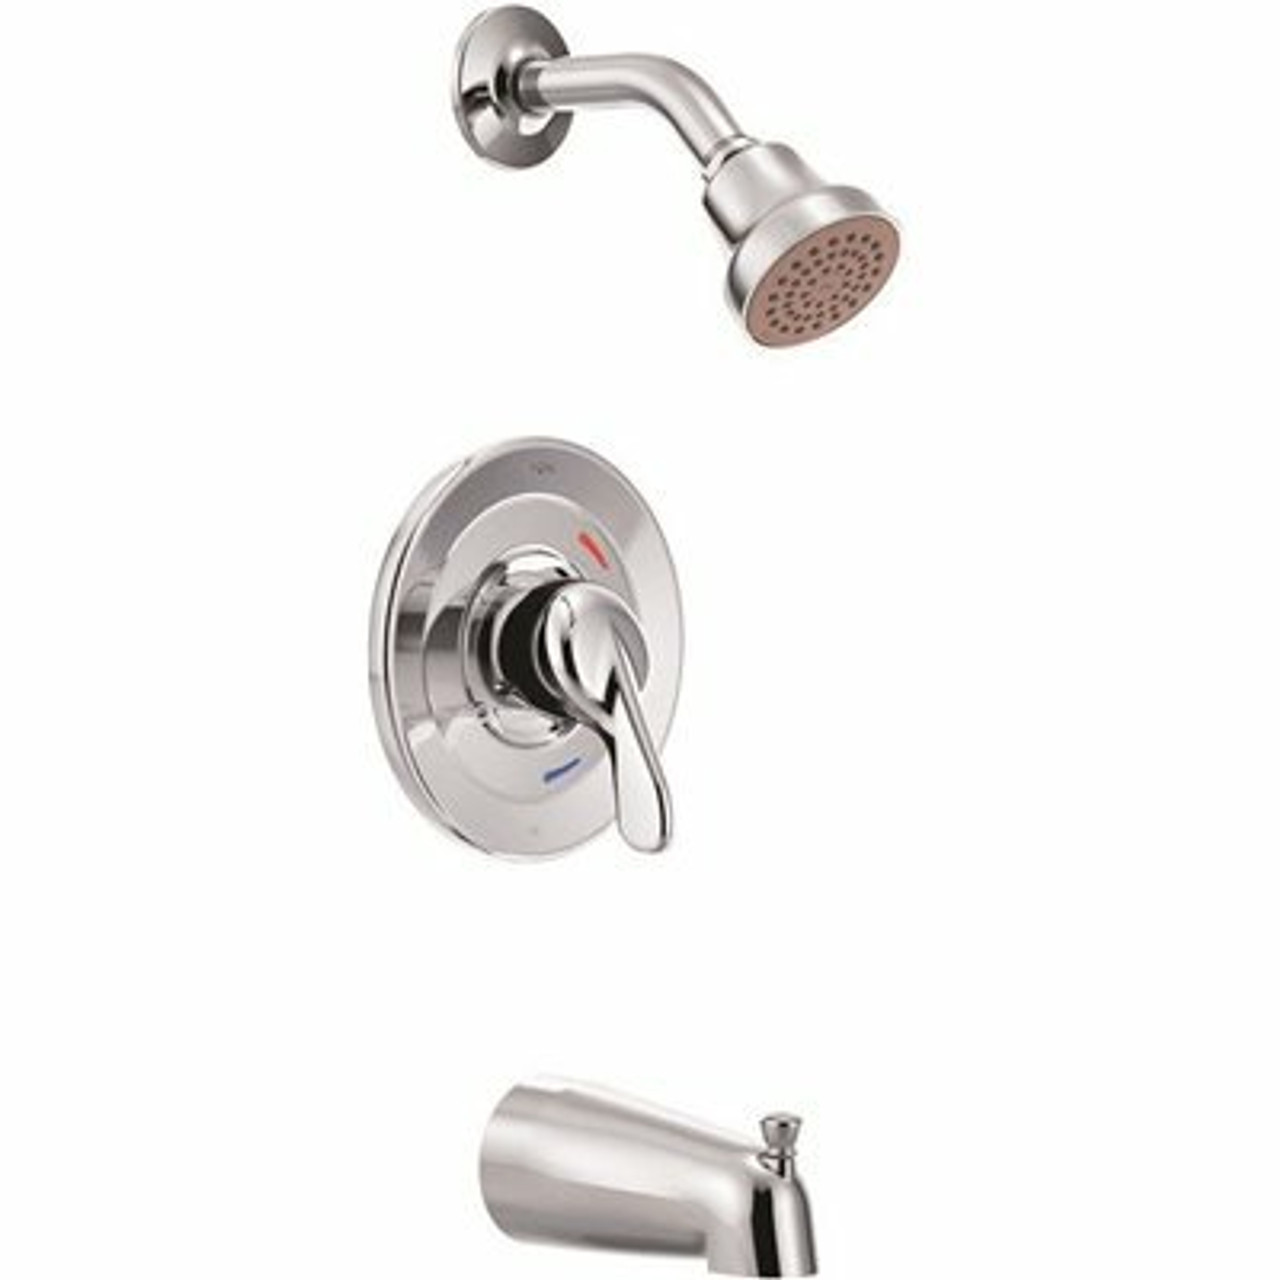 Cleveland Faucet Group Cornerstone Single-Handle 1 Spray Setting Tub And Shower Faucet In Chrome